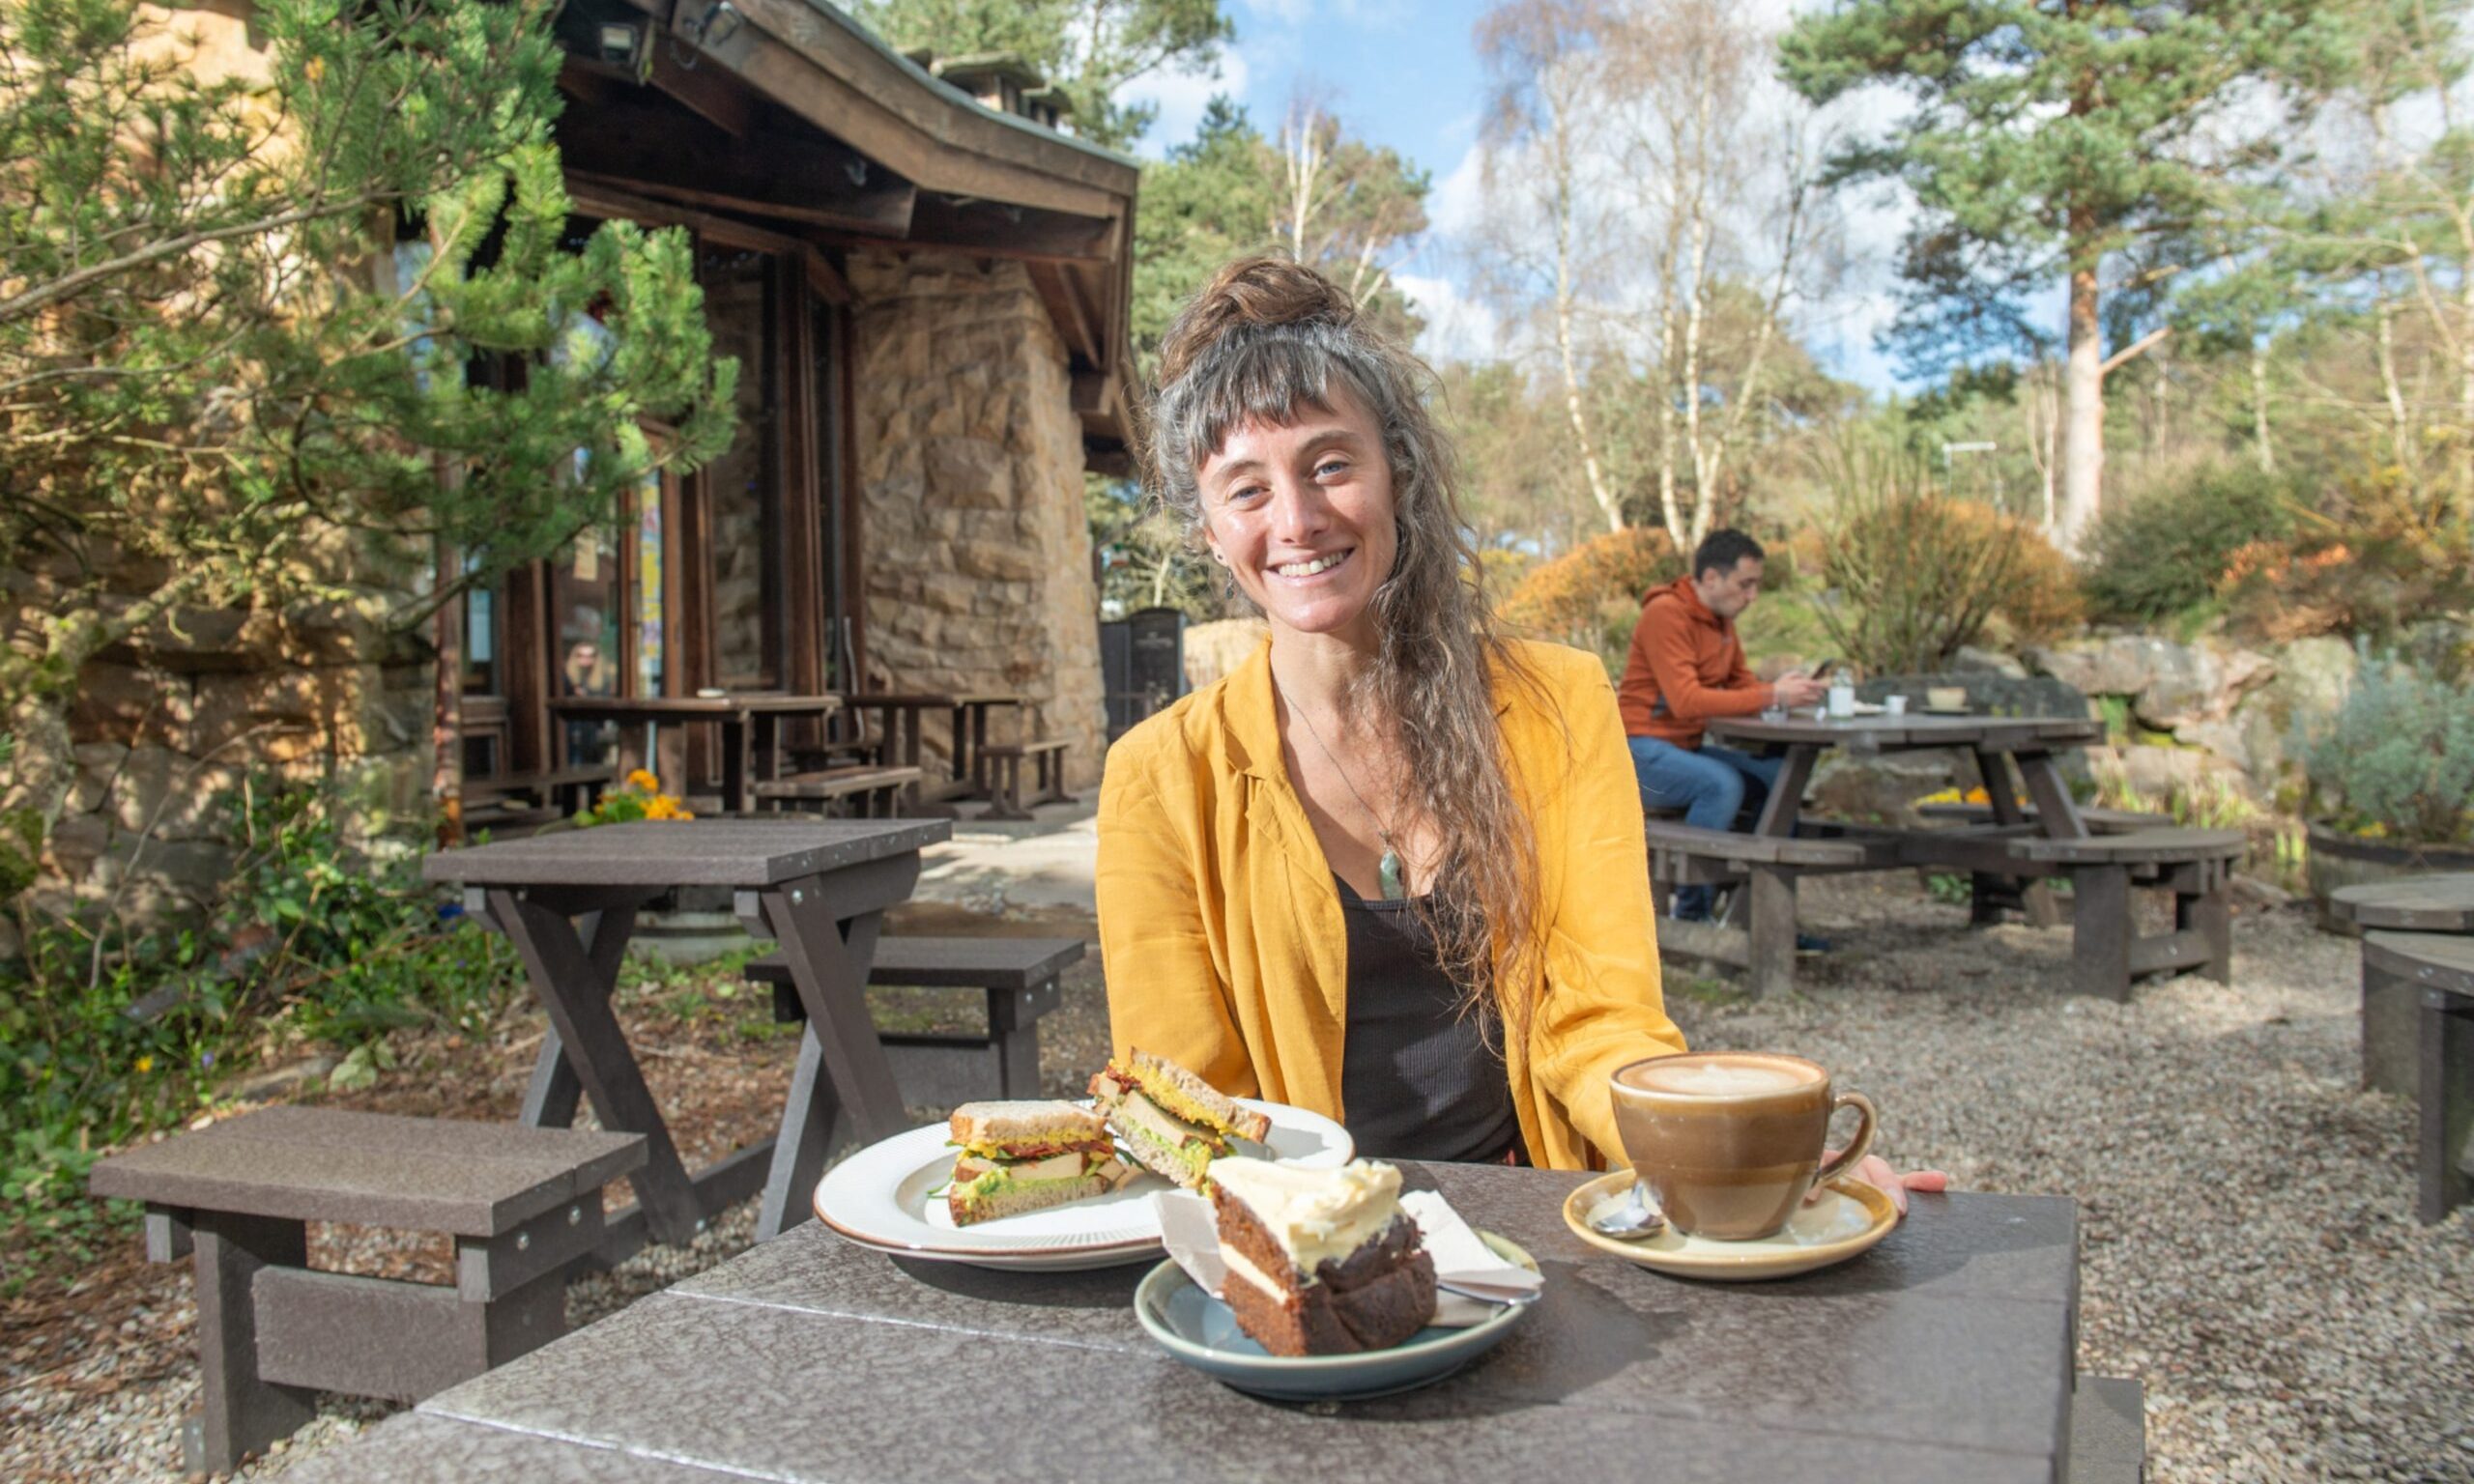 ‘Vibrant and eclectic’ Phoenix Café is at the epicentre of Findhorn’s community